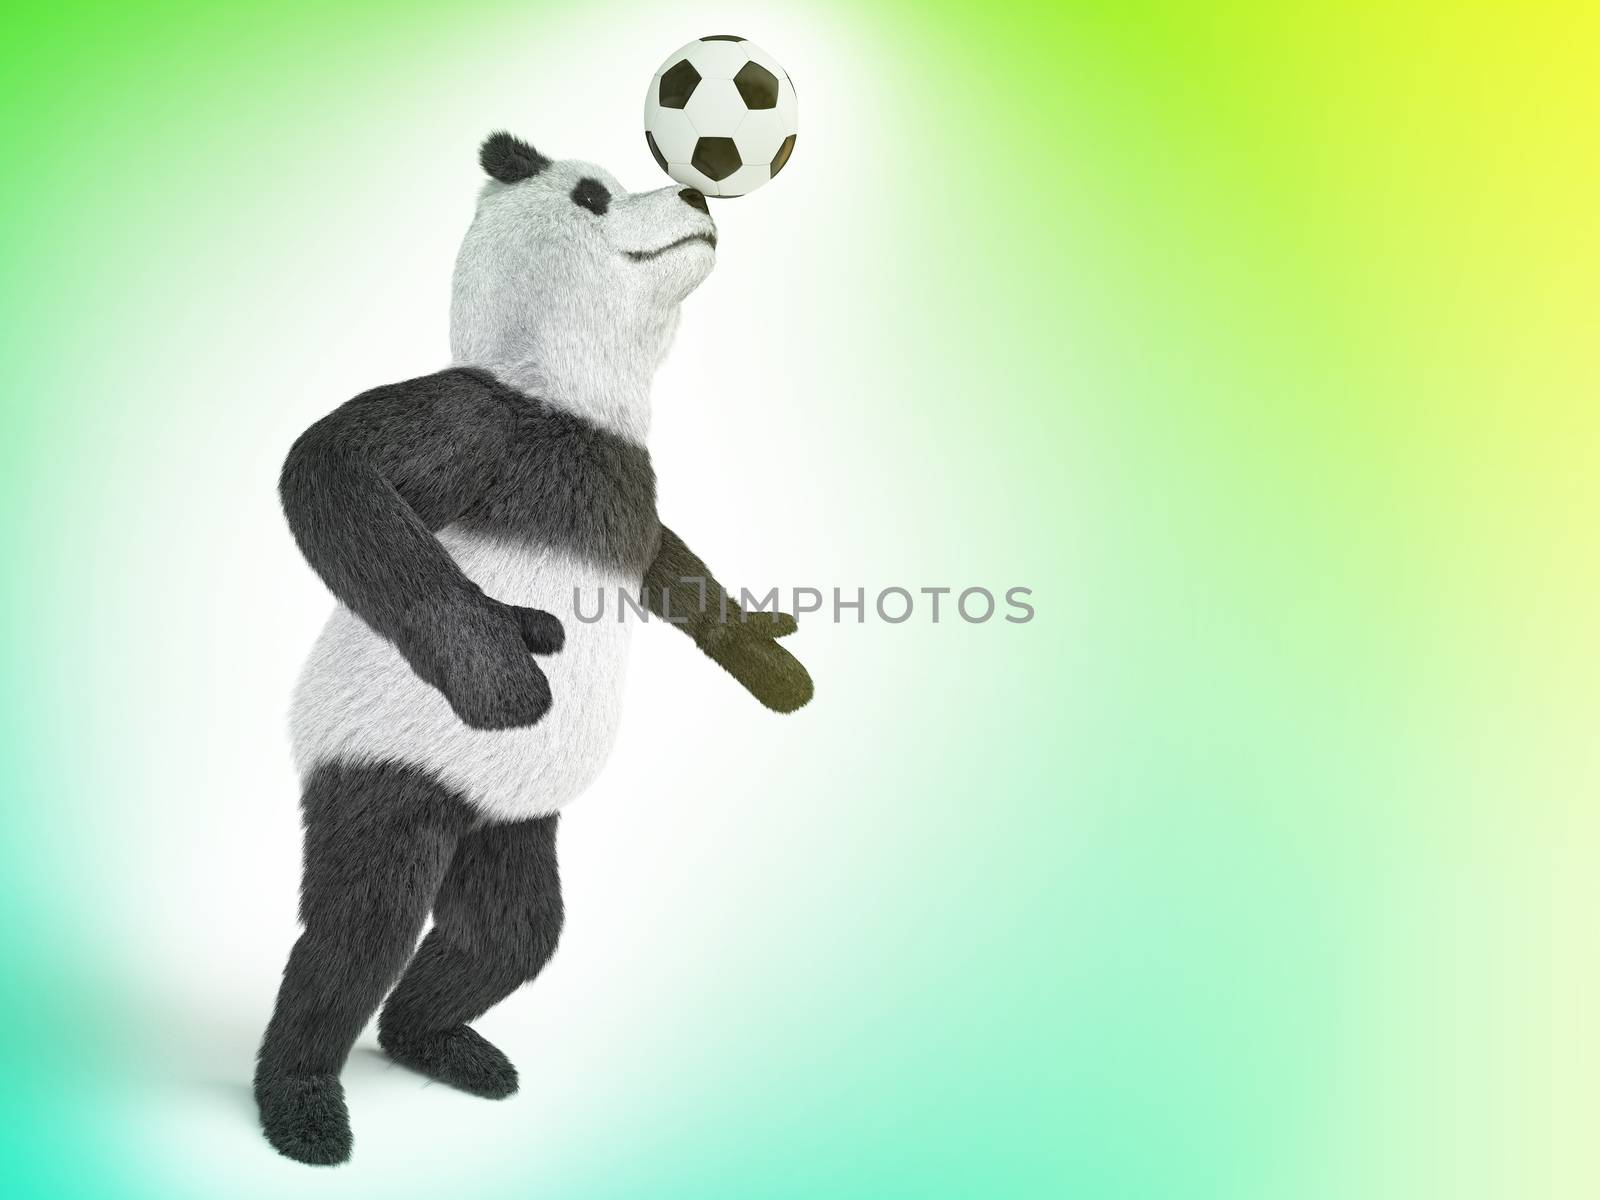 character circus bamboo bear giant panda standing spreading legs to the sides chasing a ball on his nose. involuntary amazing animal on green gradient background